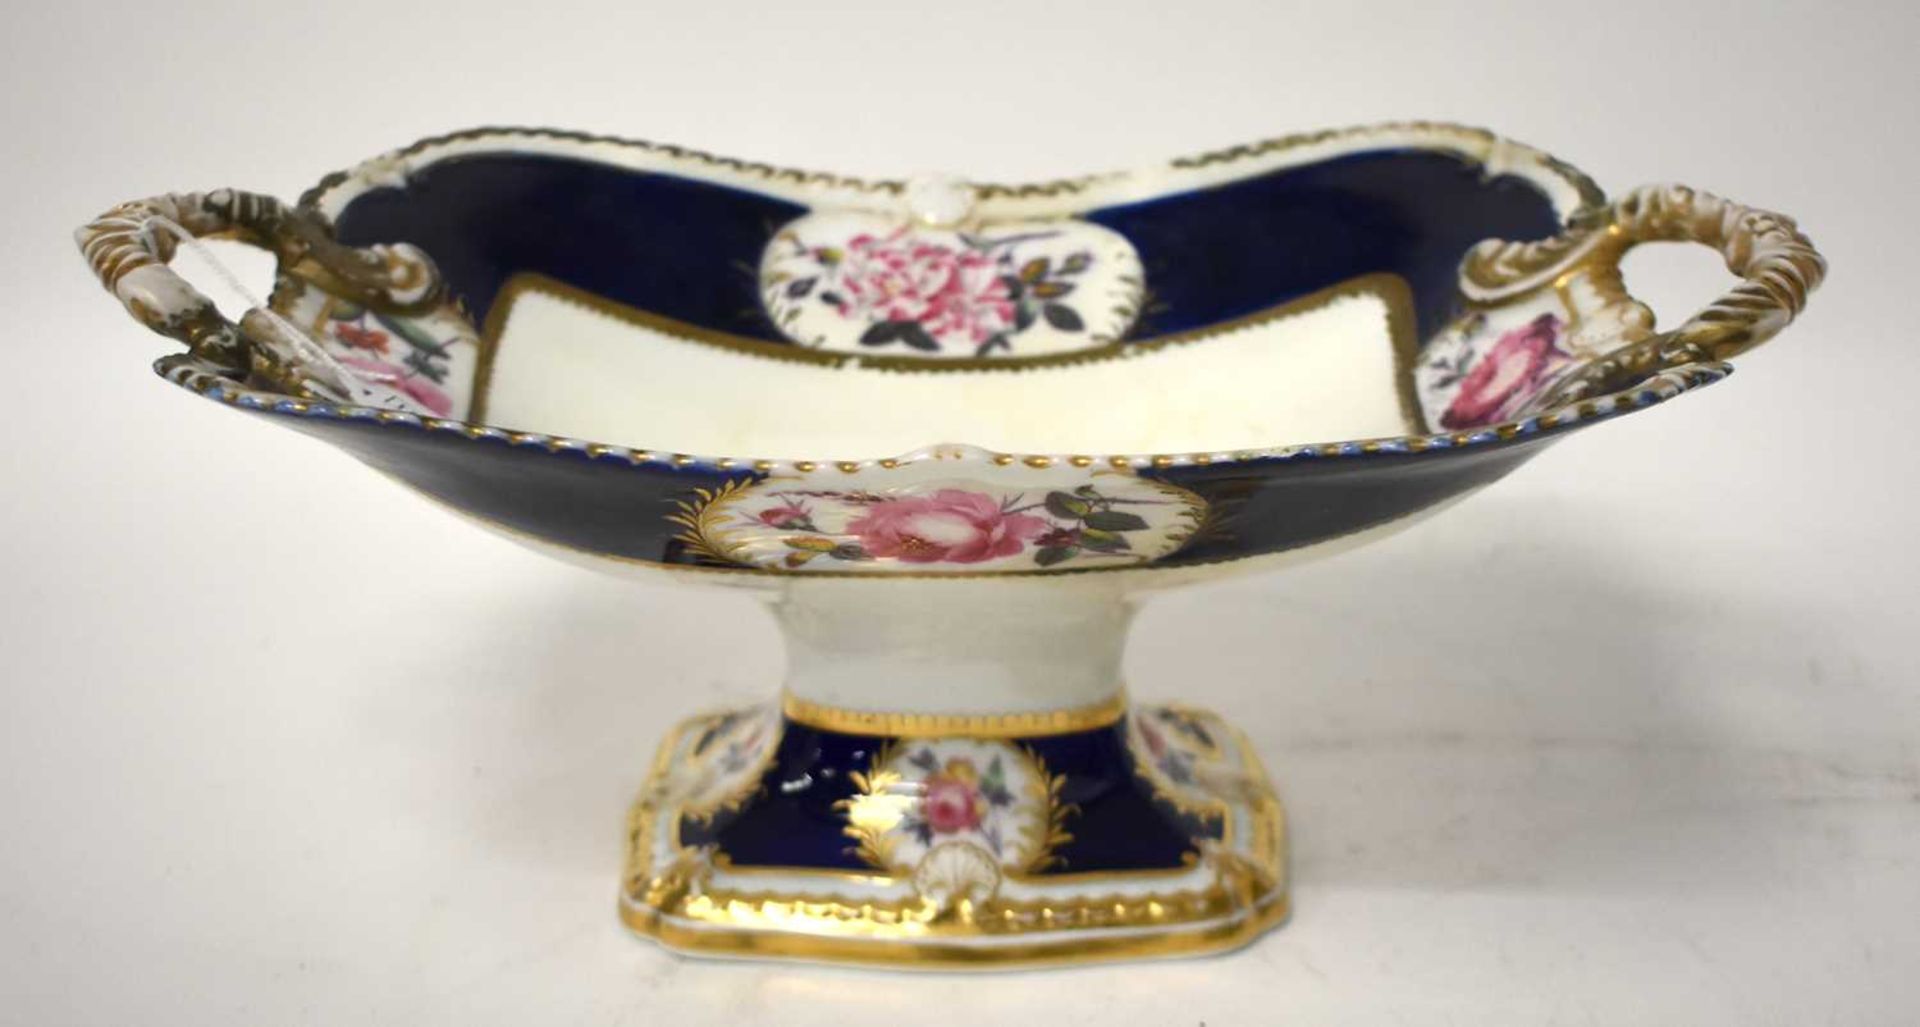 A LARGE EARLY 19TH CENTURY CHAMBERLAINS WORCESTER PORCELAIN PEDESTAL ARMORIAL COMPORT painted with - Image 5 of 12